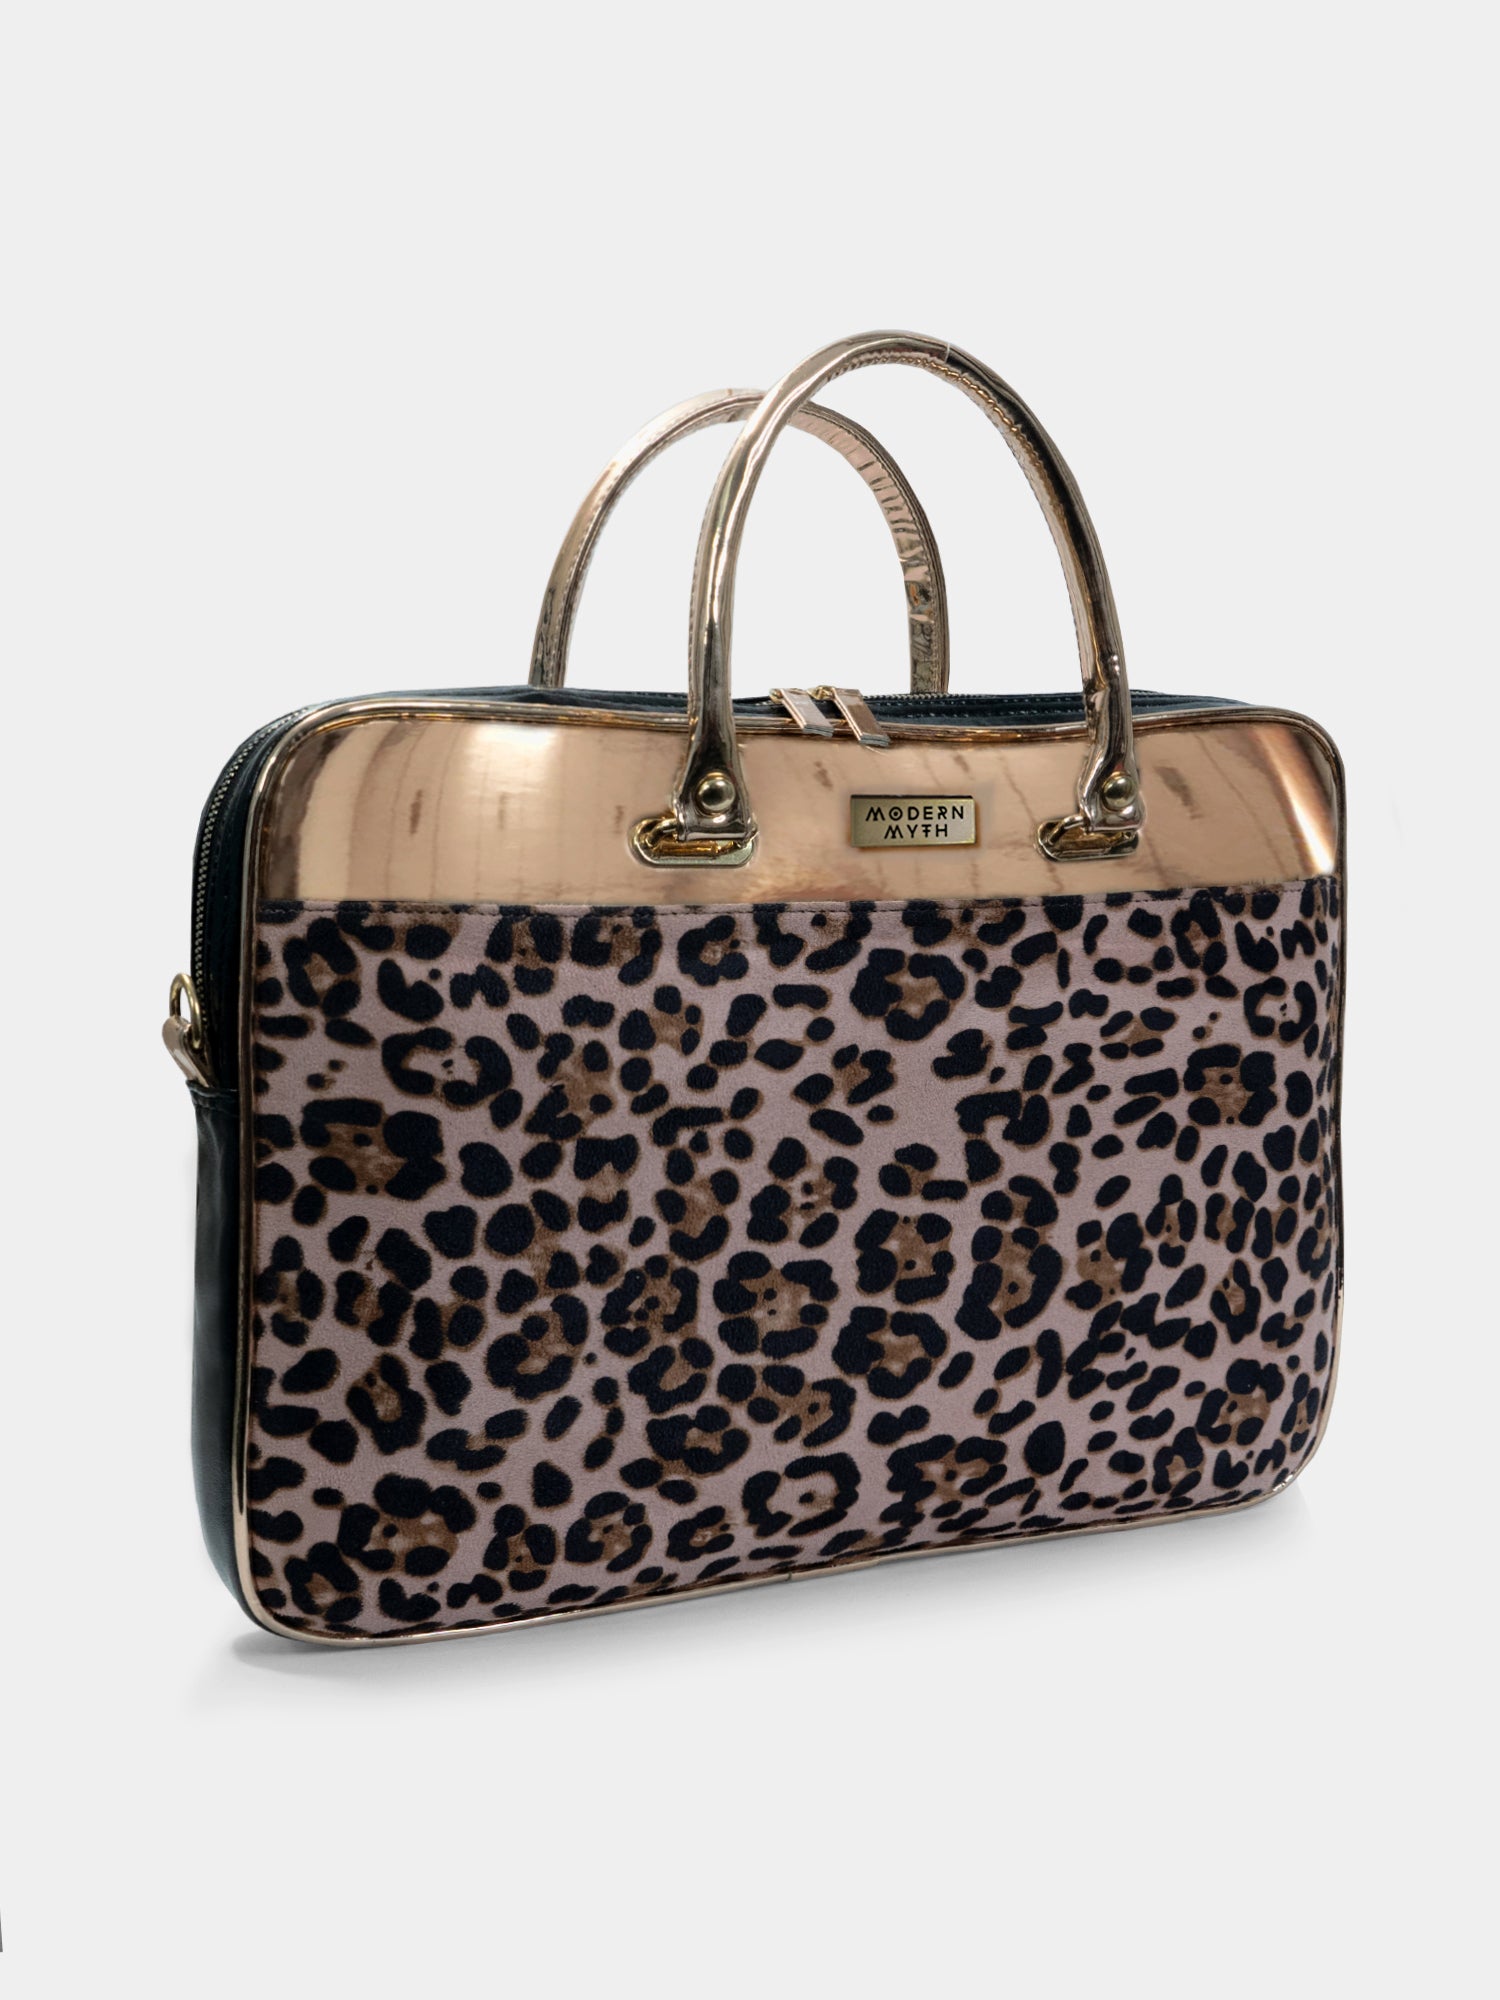 Buy Leopard Tote Bag Online In India -  India